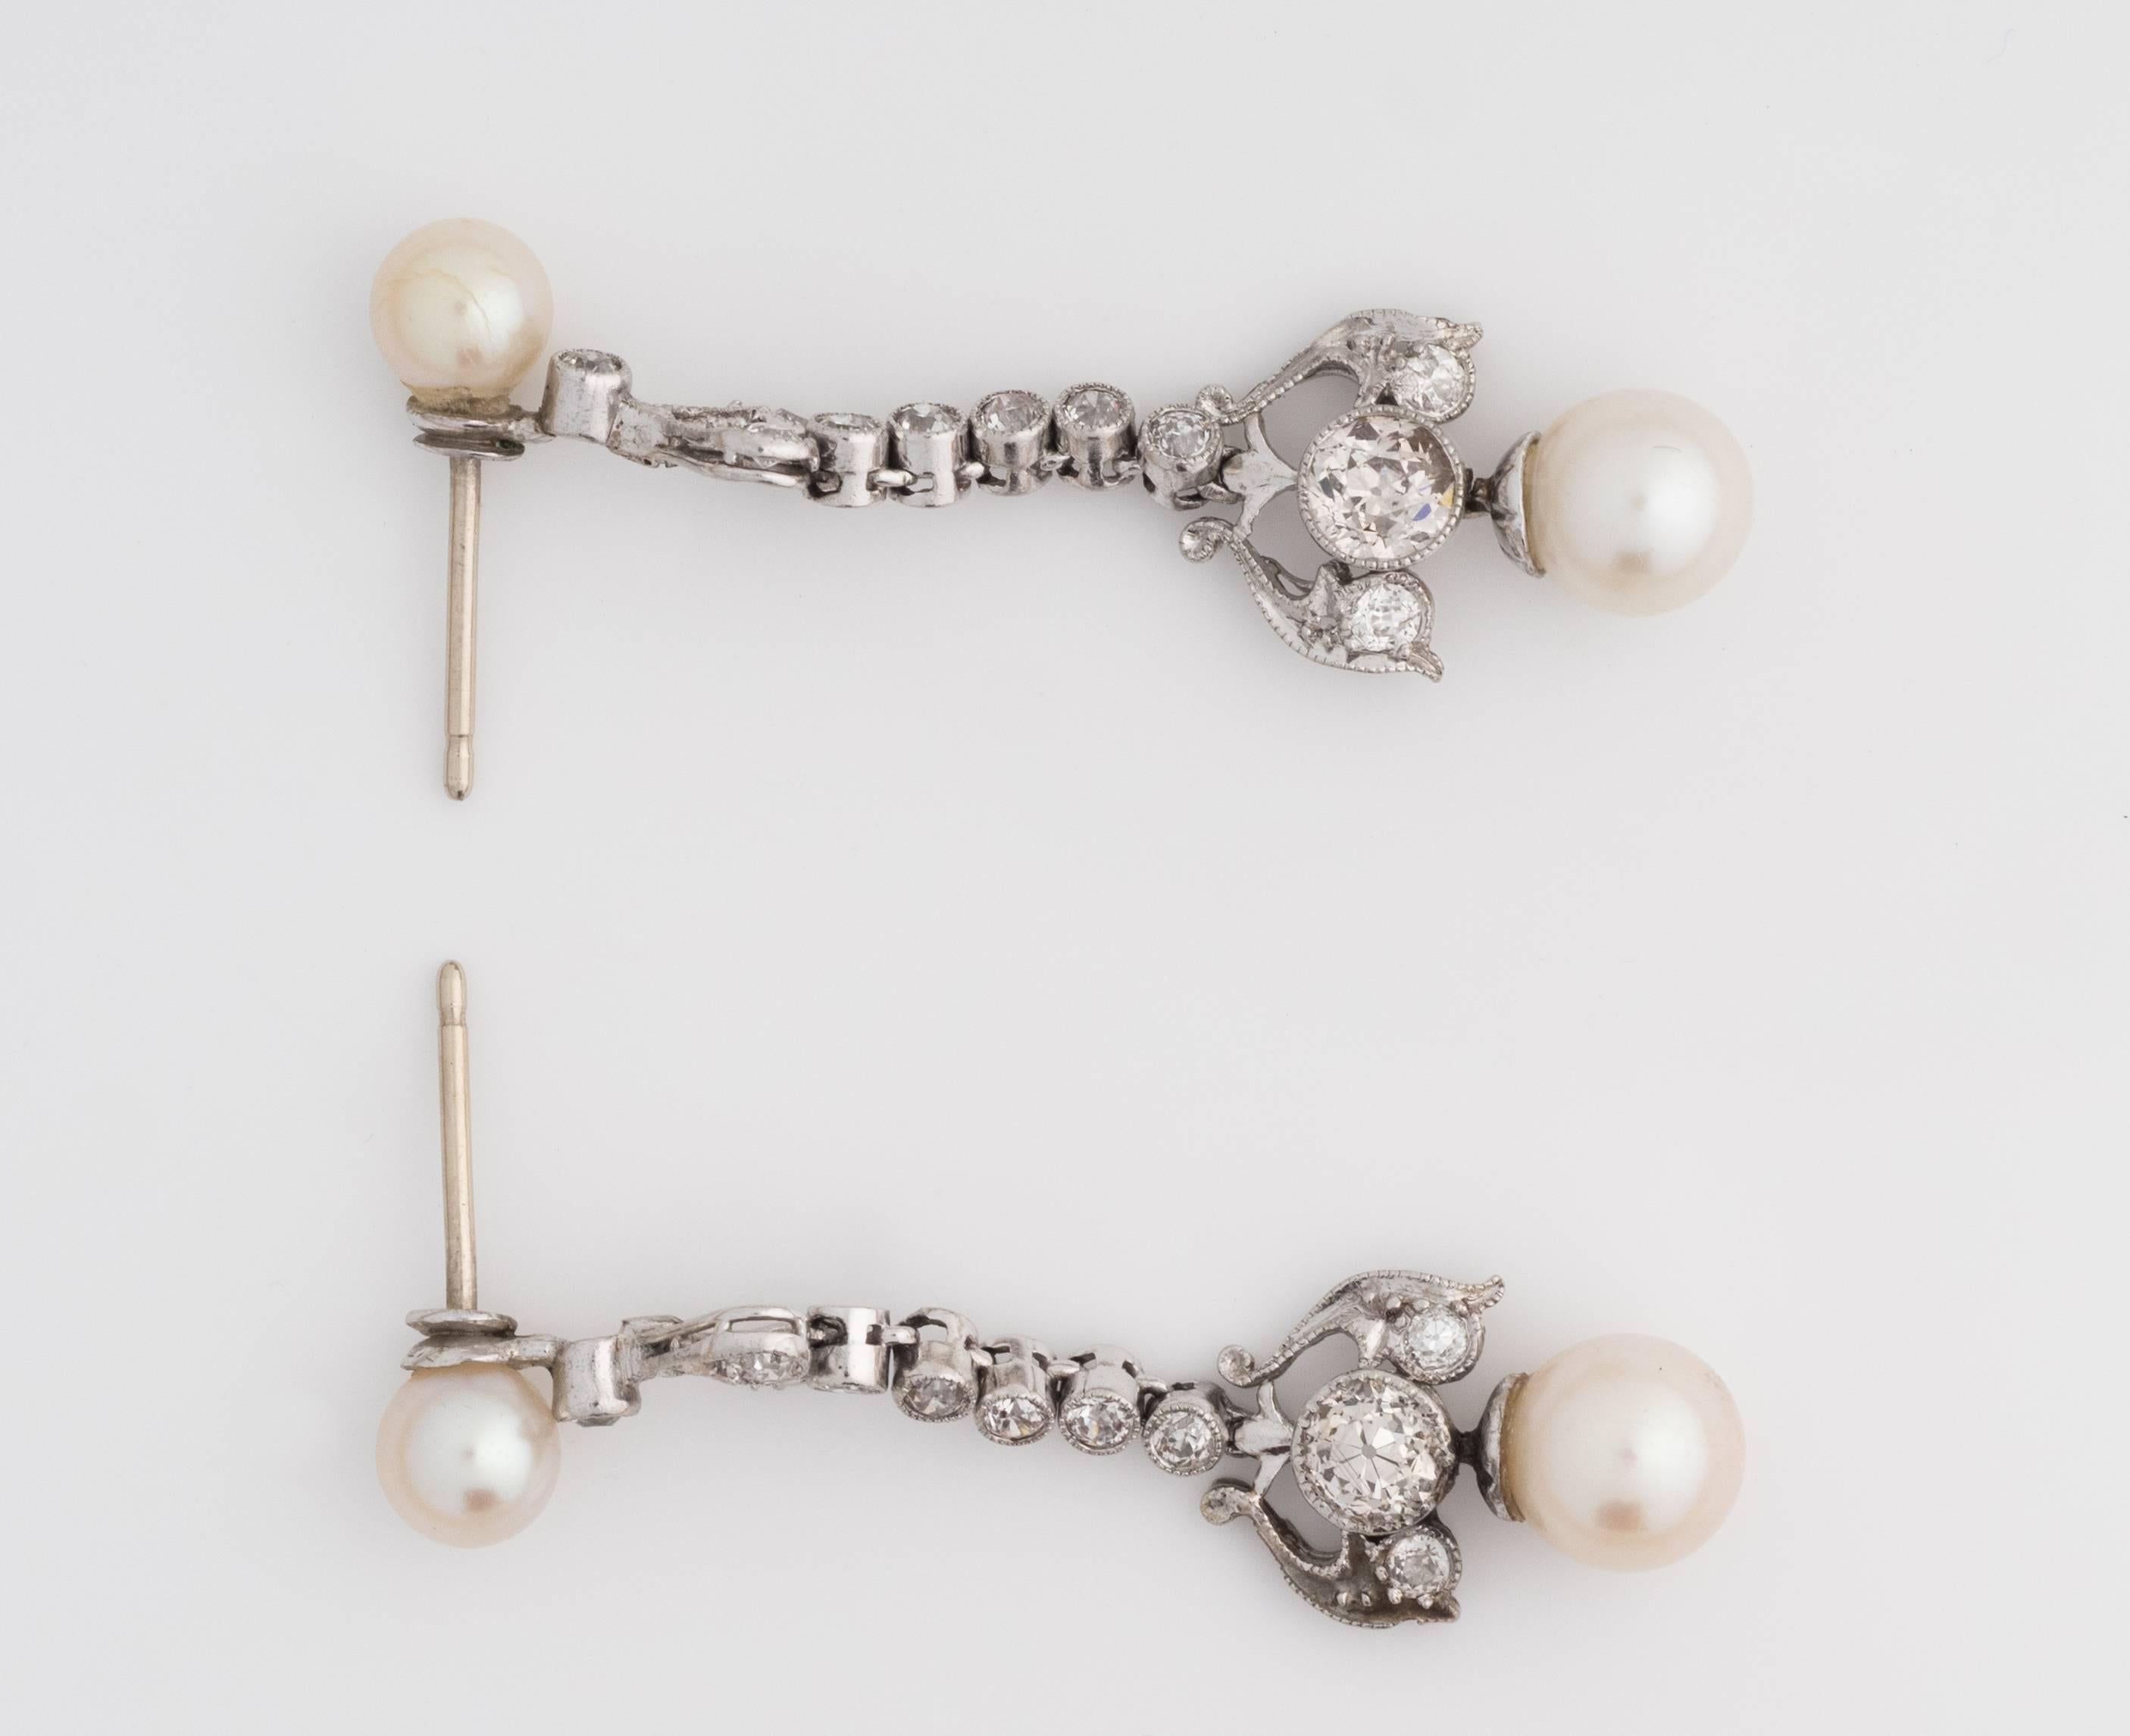 
Gorgeous Art Deco era 14k White Gold Chandelier style classic earrings. Stunning Old Miner Diamonds (1.75cttw) are seen throughout the setting with one Pearl drop accent. The old miners boast H-J color, VS-SI2 clarity. The pearls are fresh water